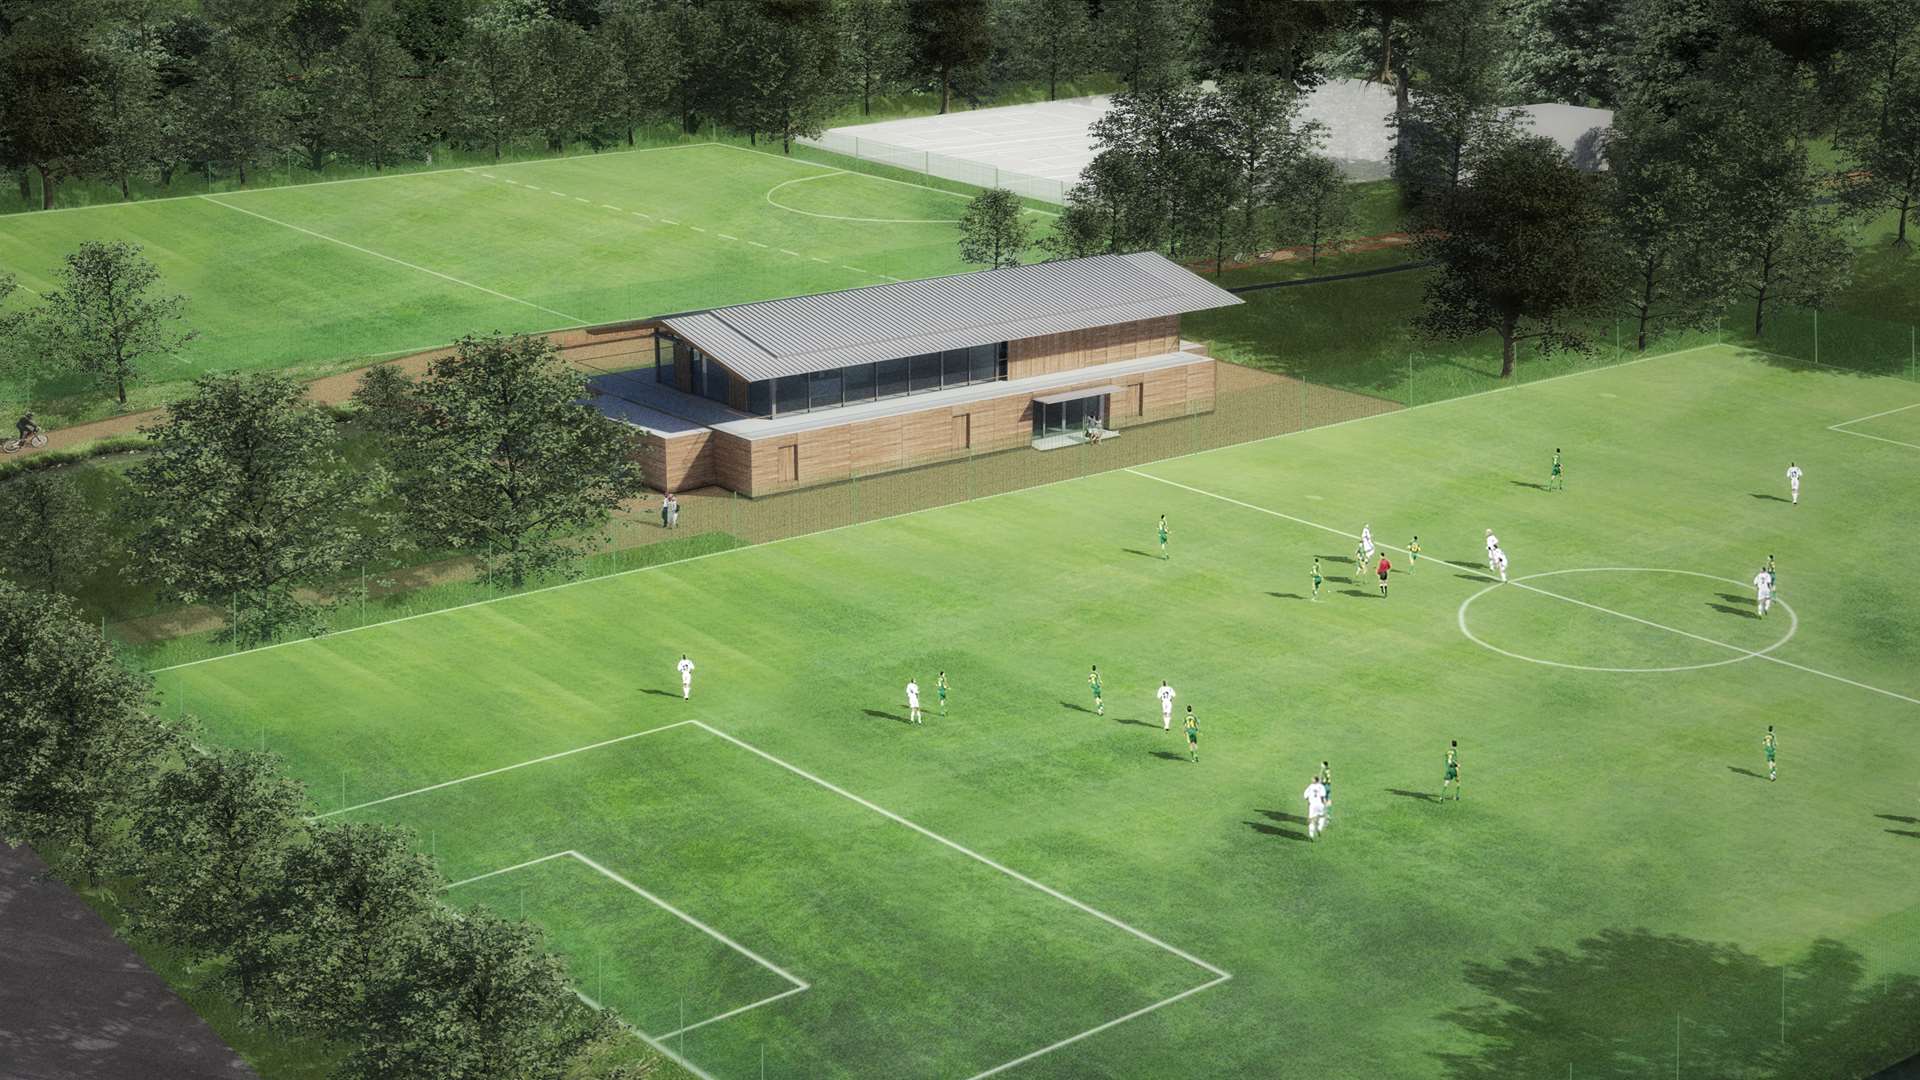 An artist's impression of how the sports hub might look